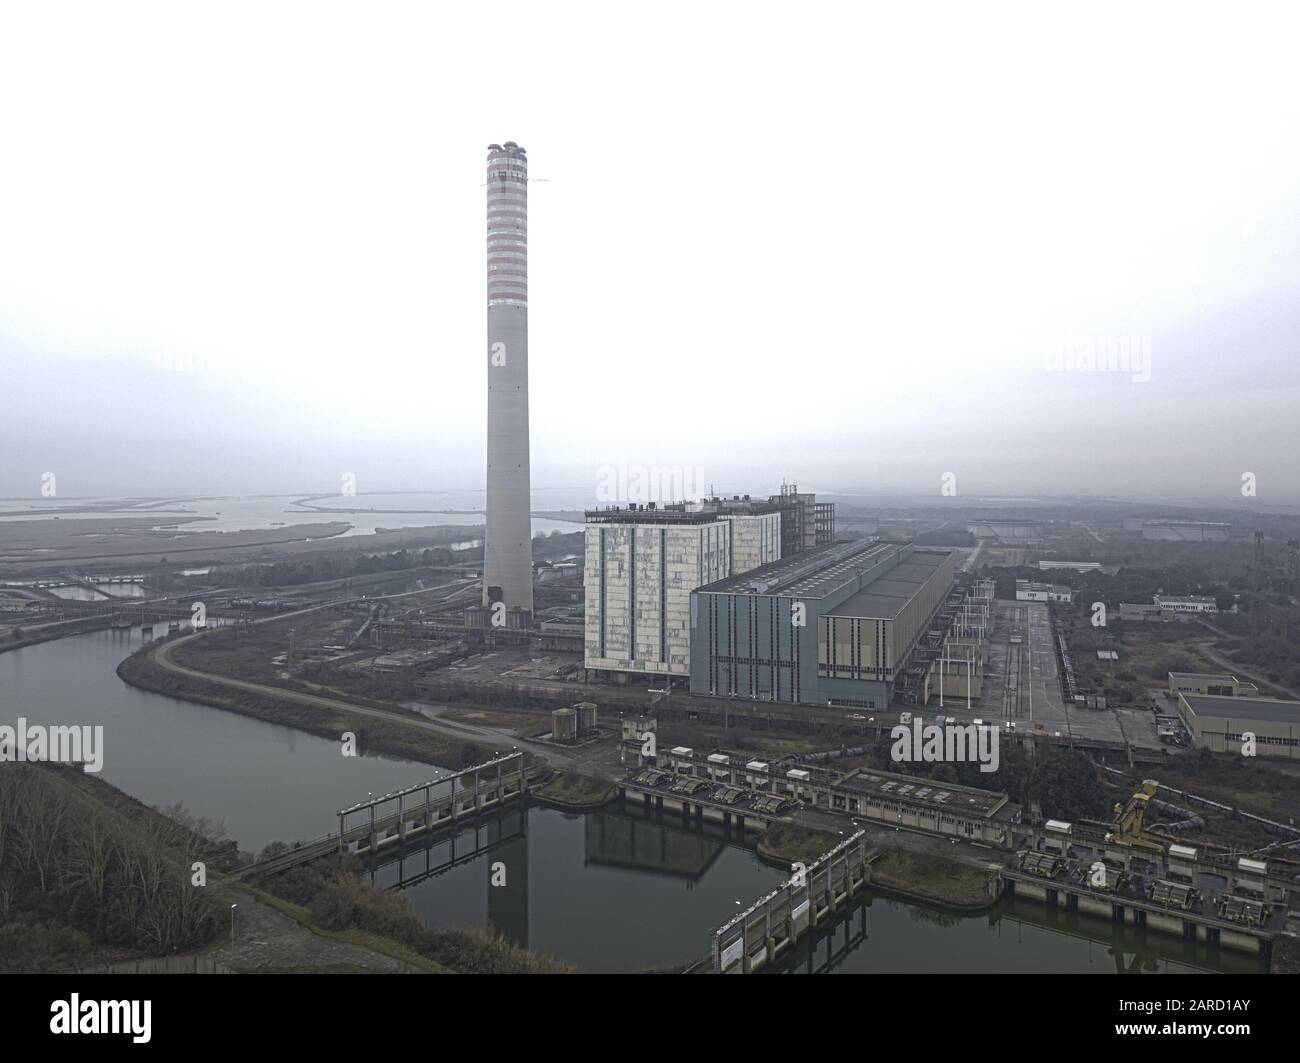 Abandoned coal power plant located in the delta of the river Po, Italy. Stock Photo